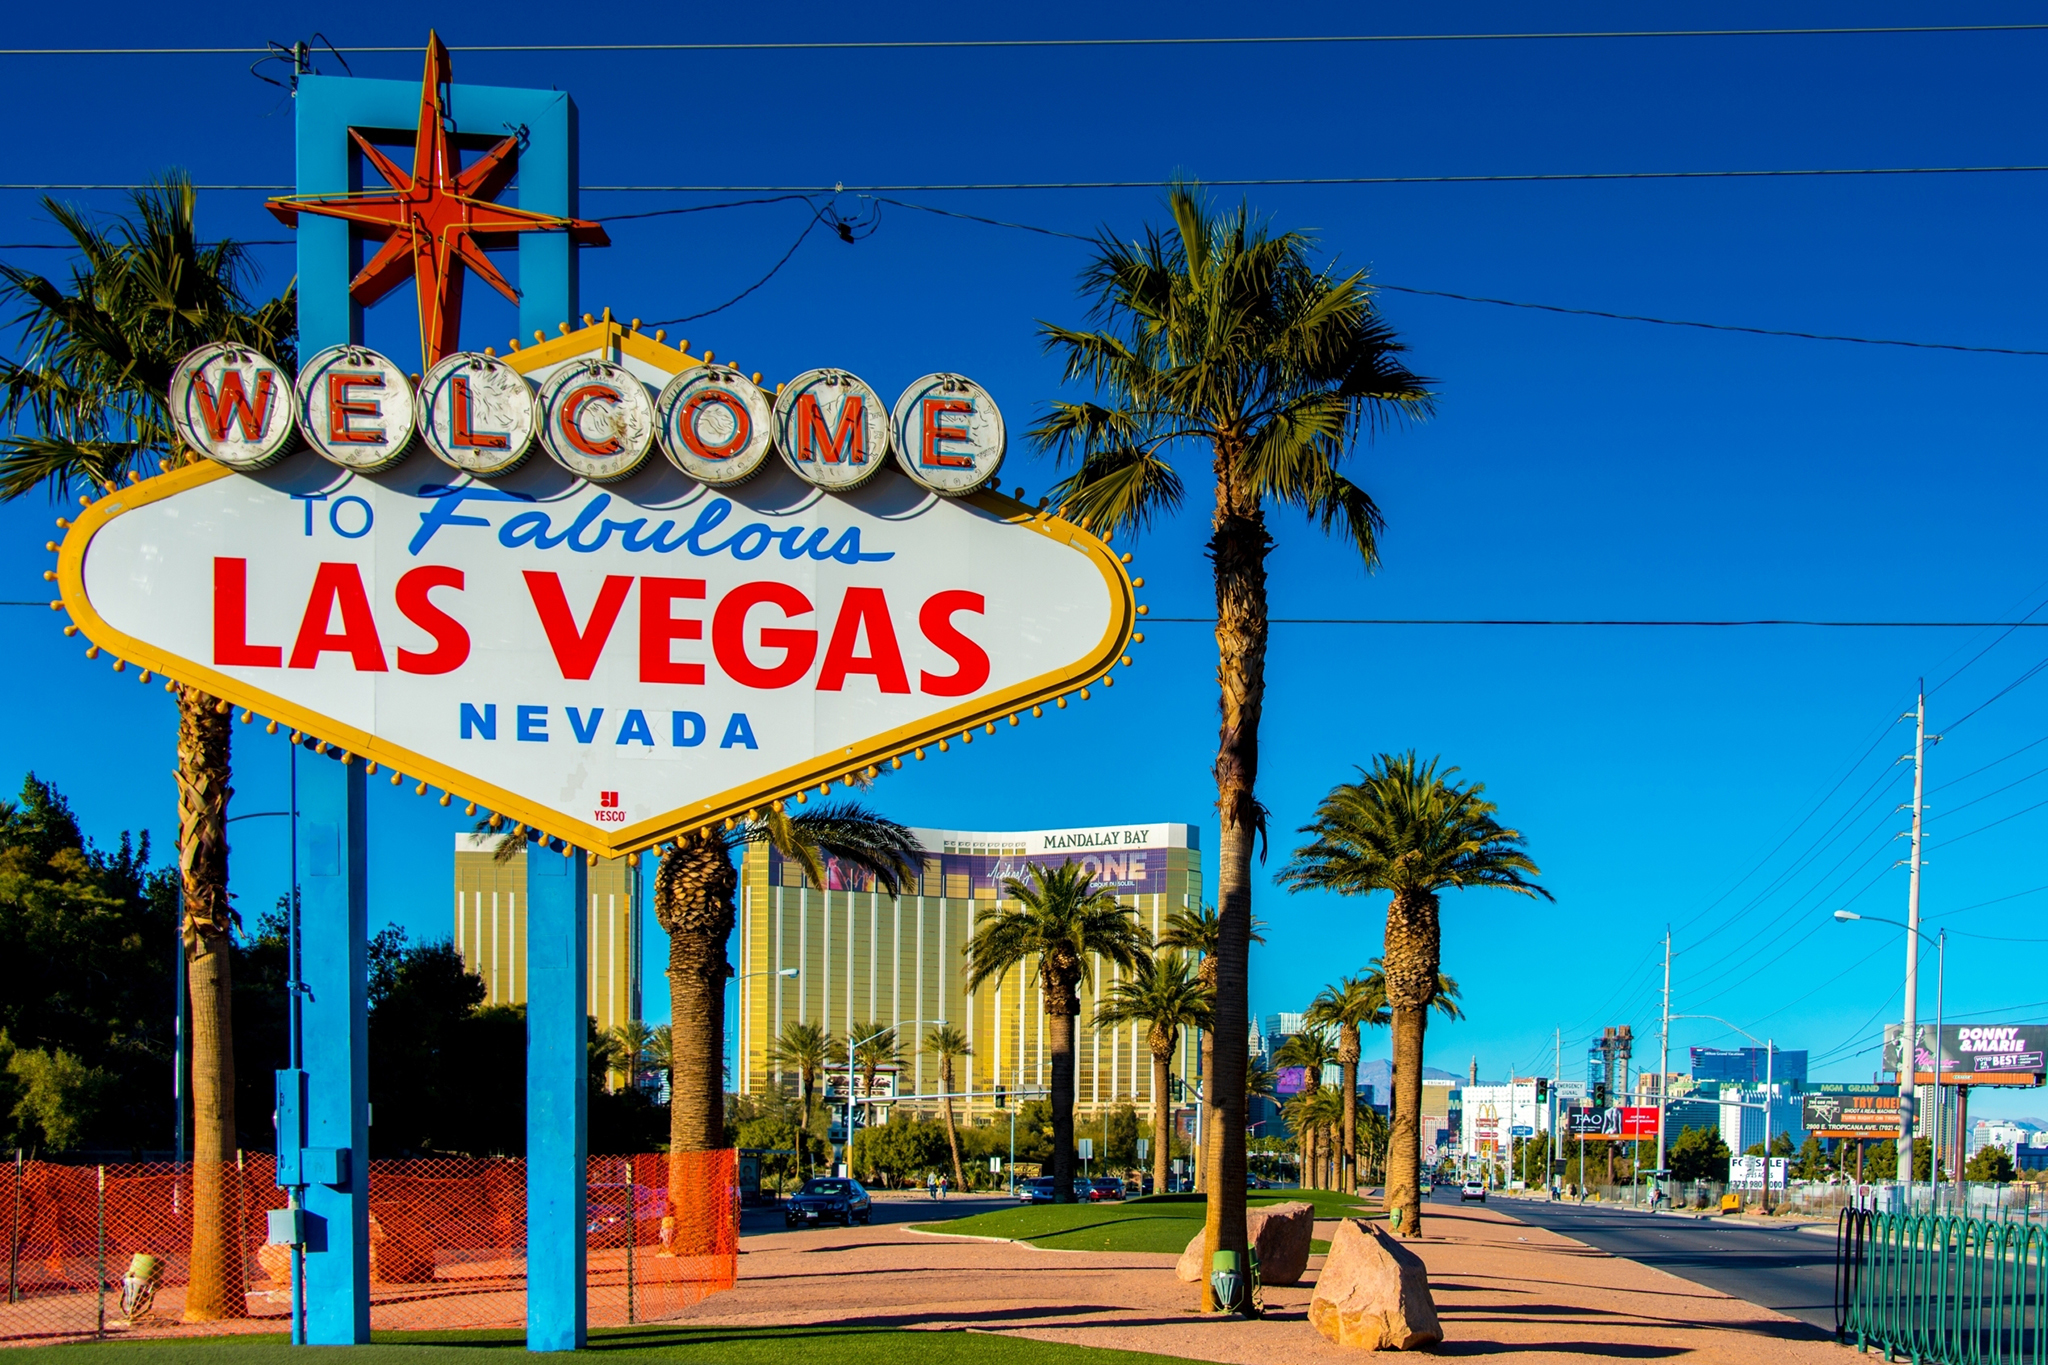 Las Vegas travel deals on hotels, shows, and things to do